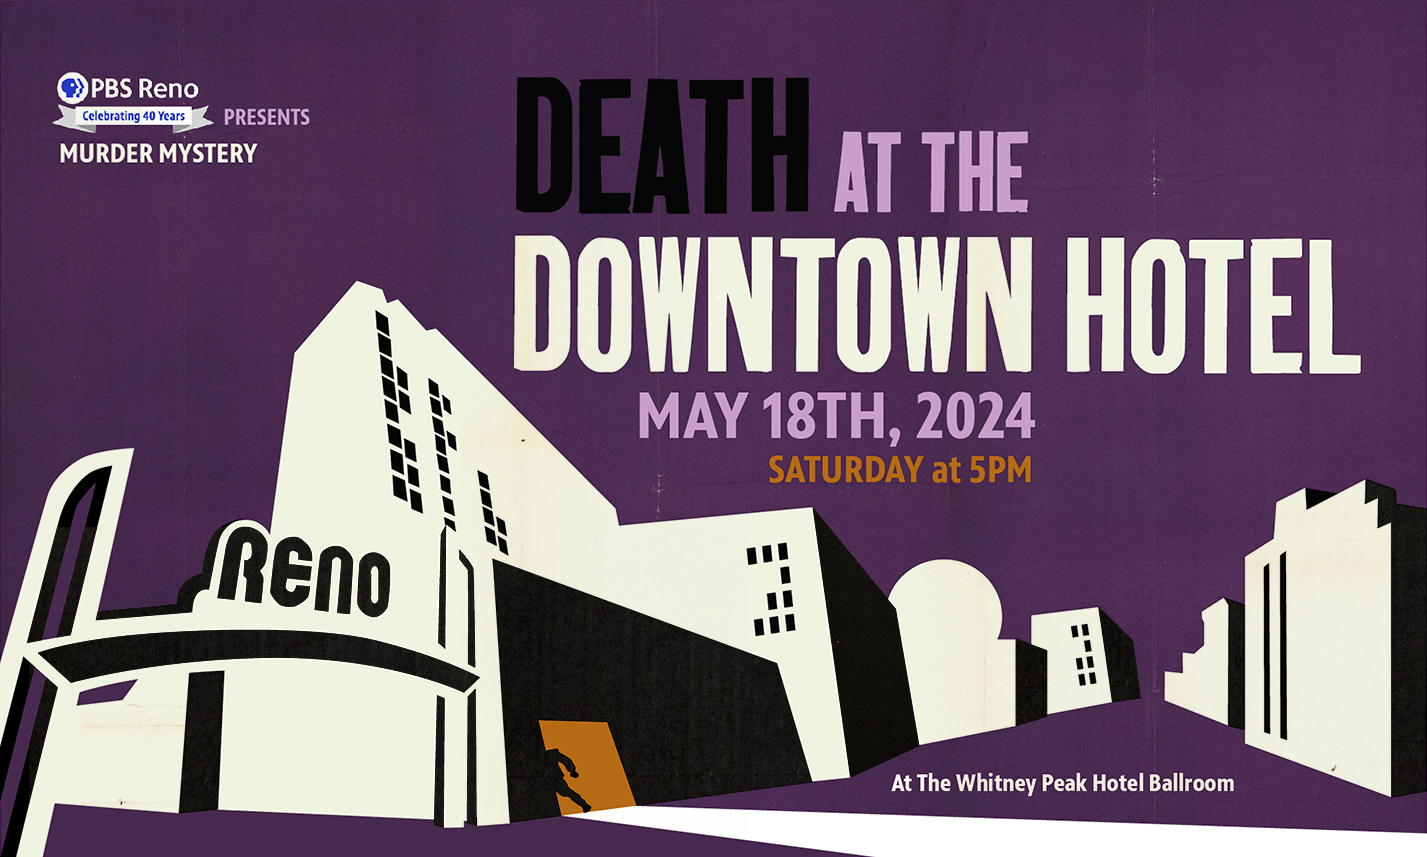 PBS Reno Murder Mystery presents Death at the Downtown Hotel at the Whitney peak Hotel Ballroom